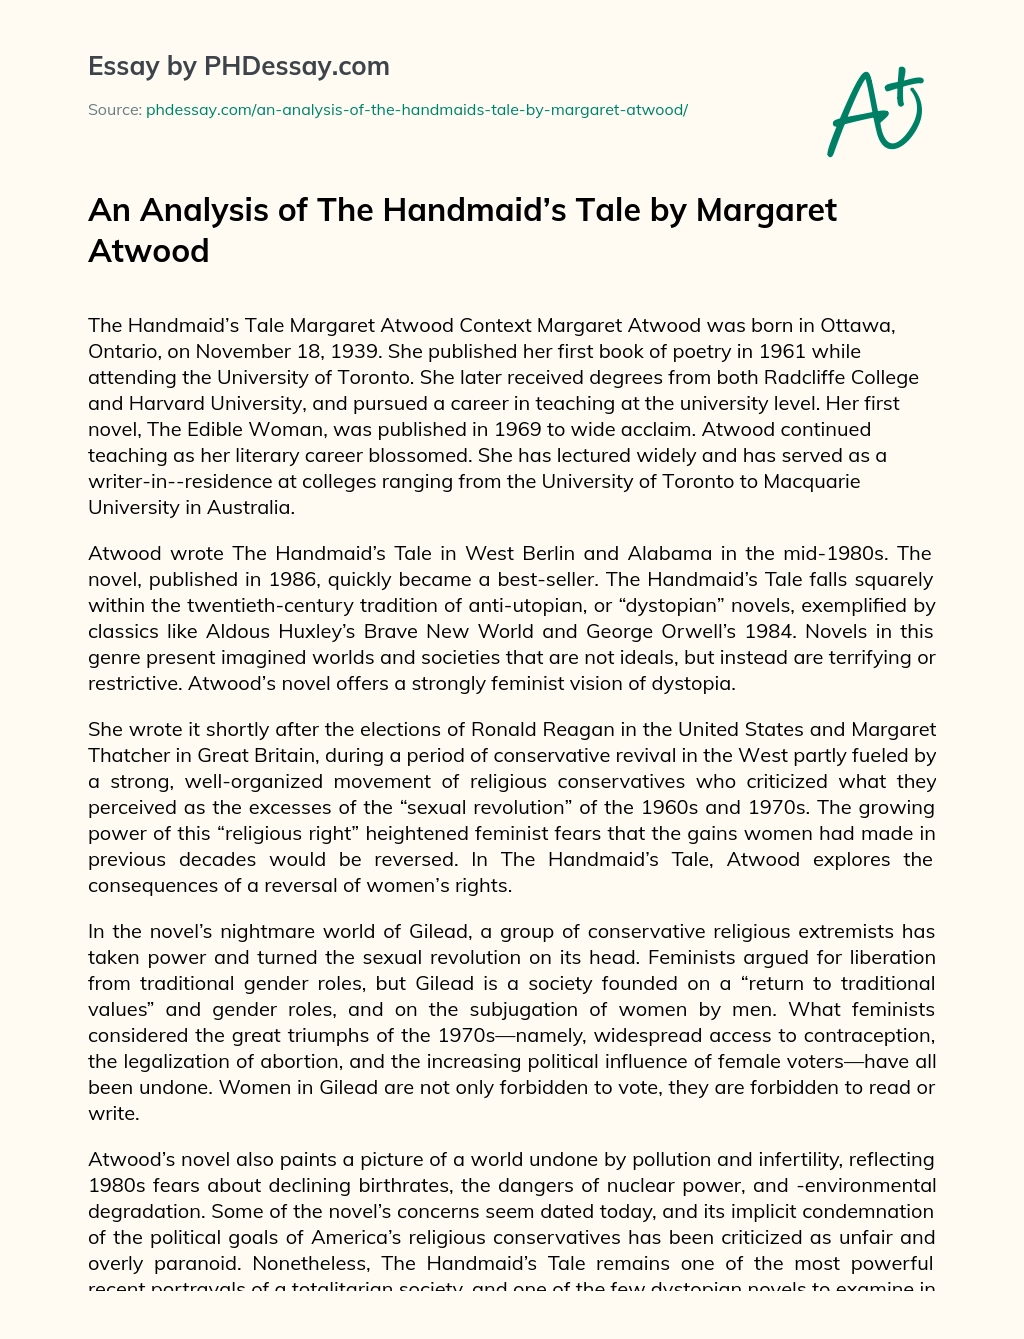 An Analysis of The Handmaid’s Tale by Margaret Atwood essay